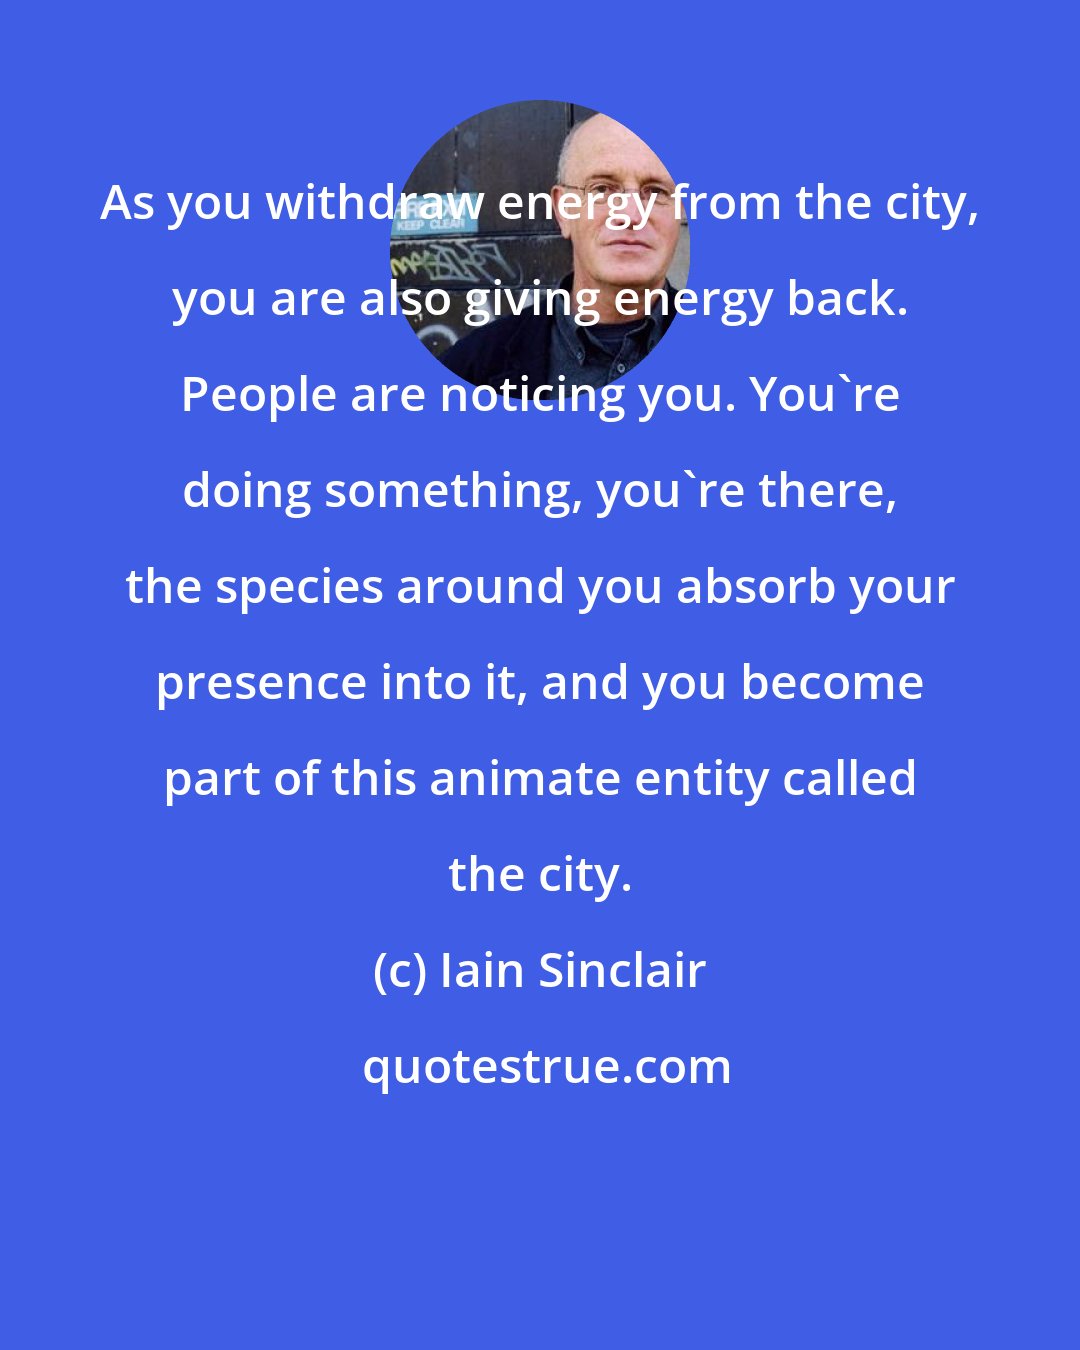 Iain Sinclair: As you withdraw energy from the city, you are also giving energy back. People are noticing you. You're doing something, you're there, the species around you absorb your presence into it, and you become part of this animate entity called the city.